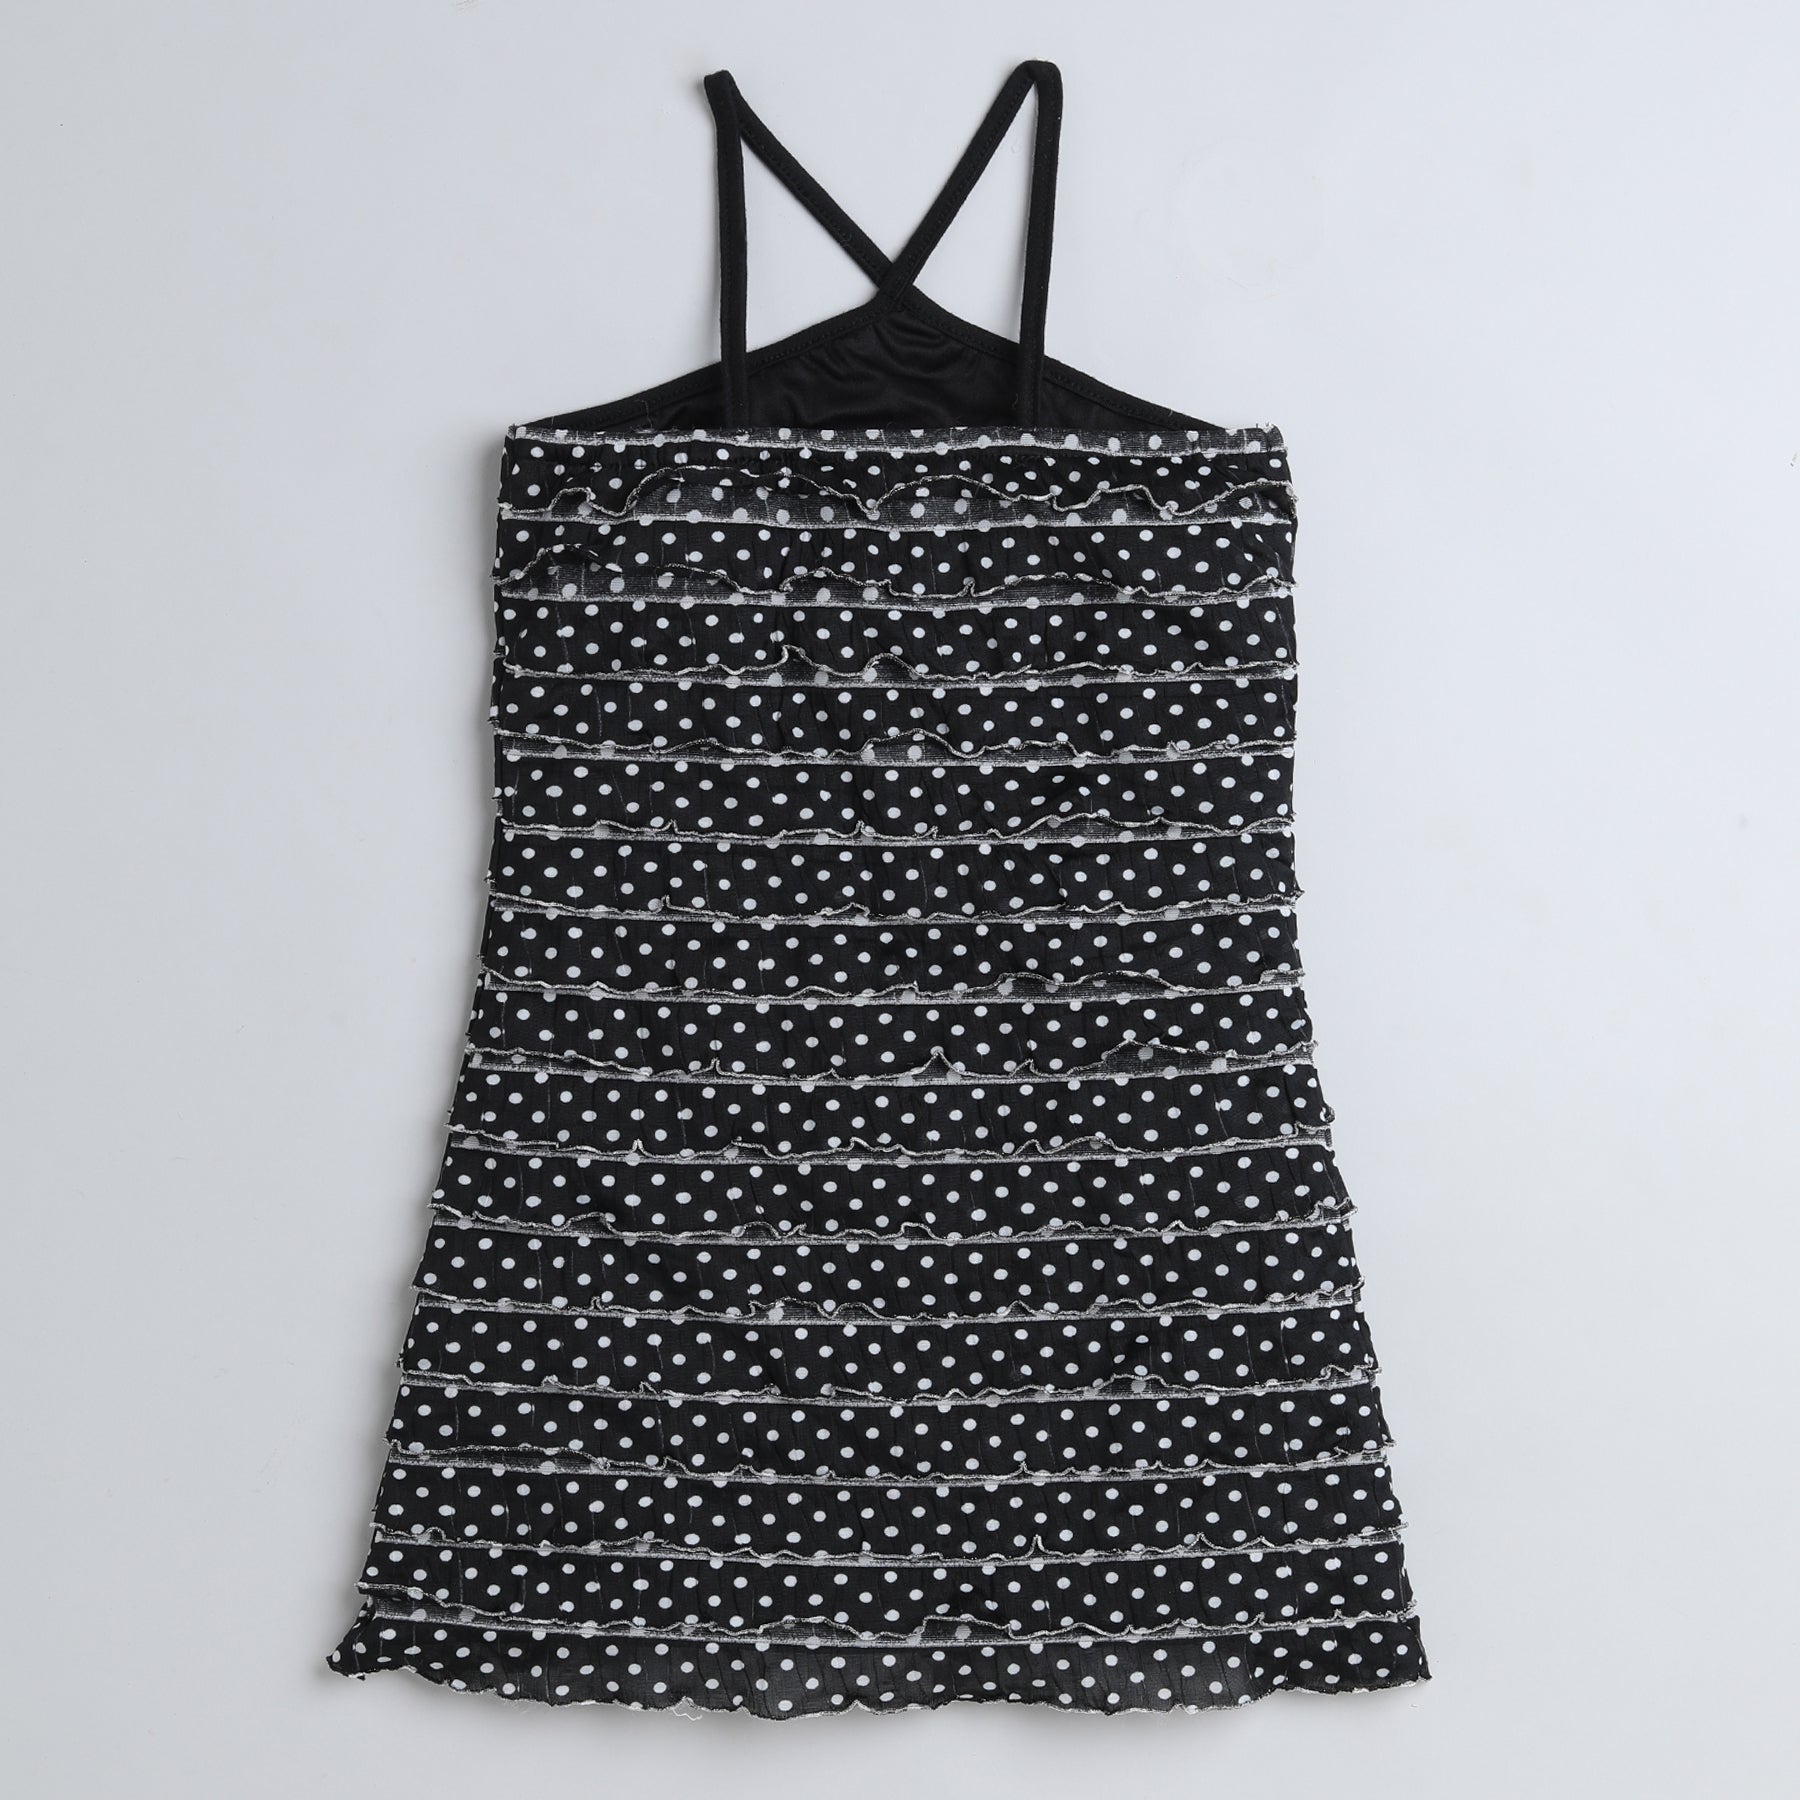 Shop Polka Dots Printed Halter Neck Ruffled A-Line Party Dress-Black/White Online